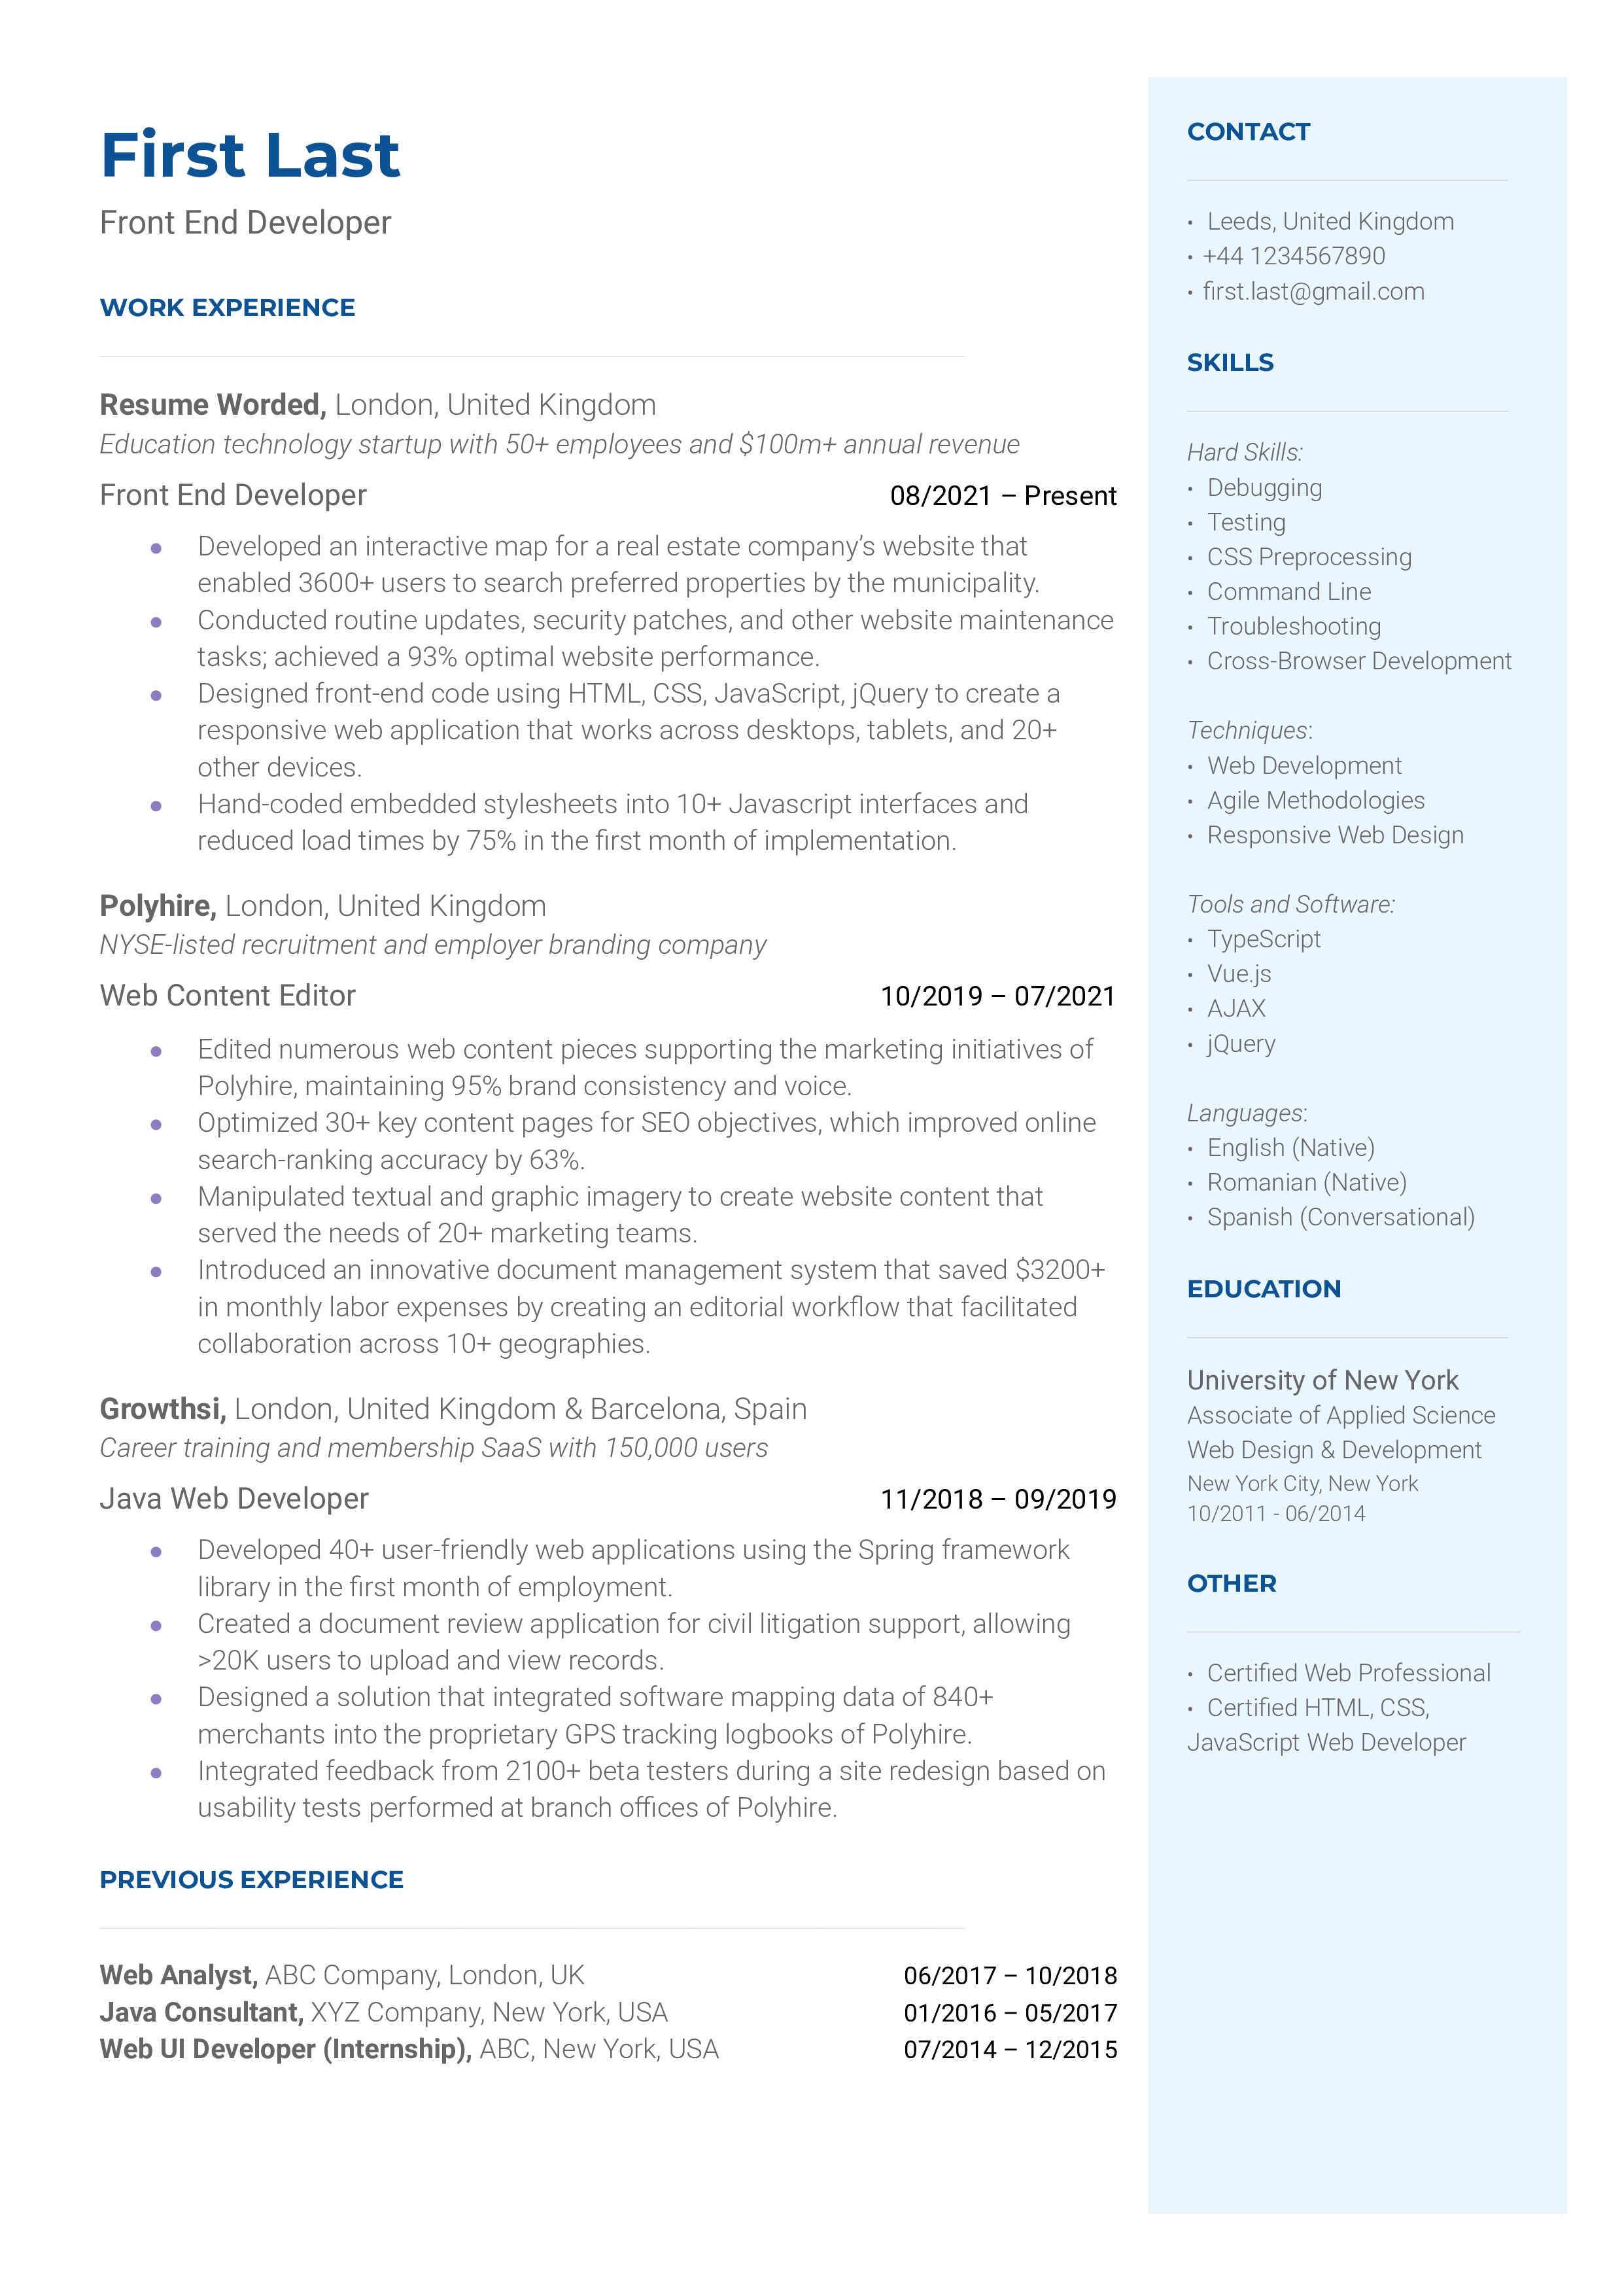 A well-structured CV showcasing the skills and accomplishments of a Front-End Developer.